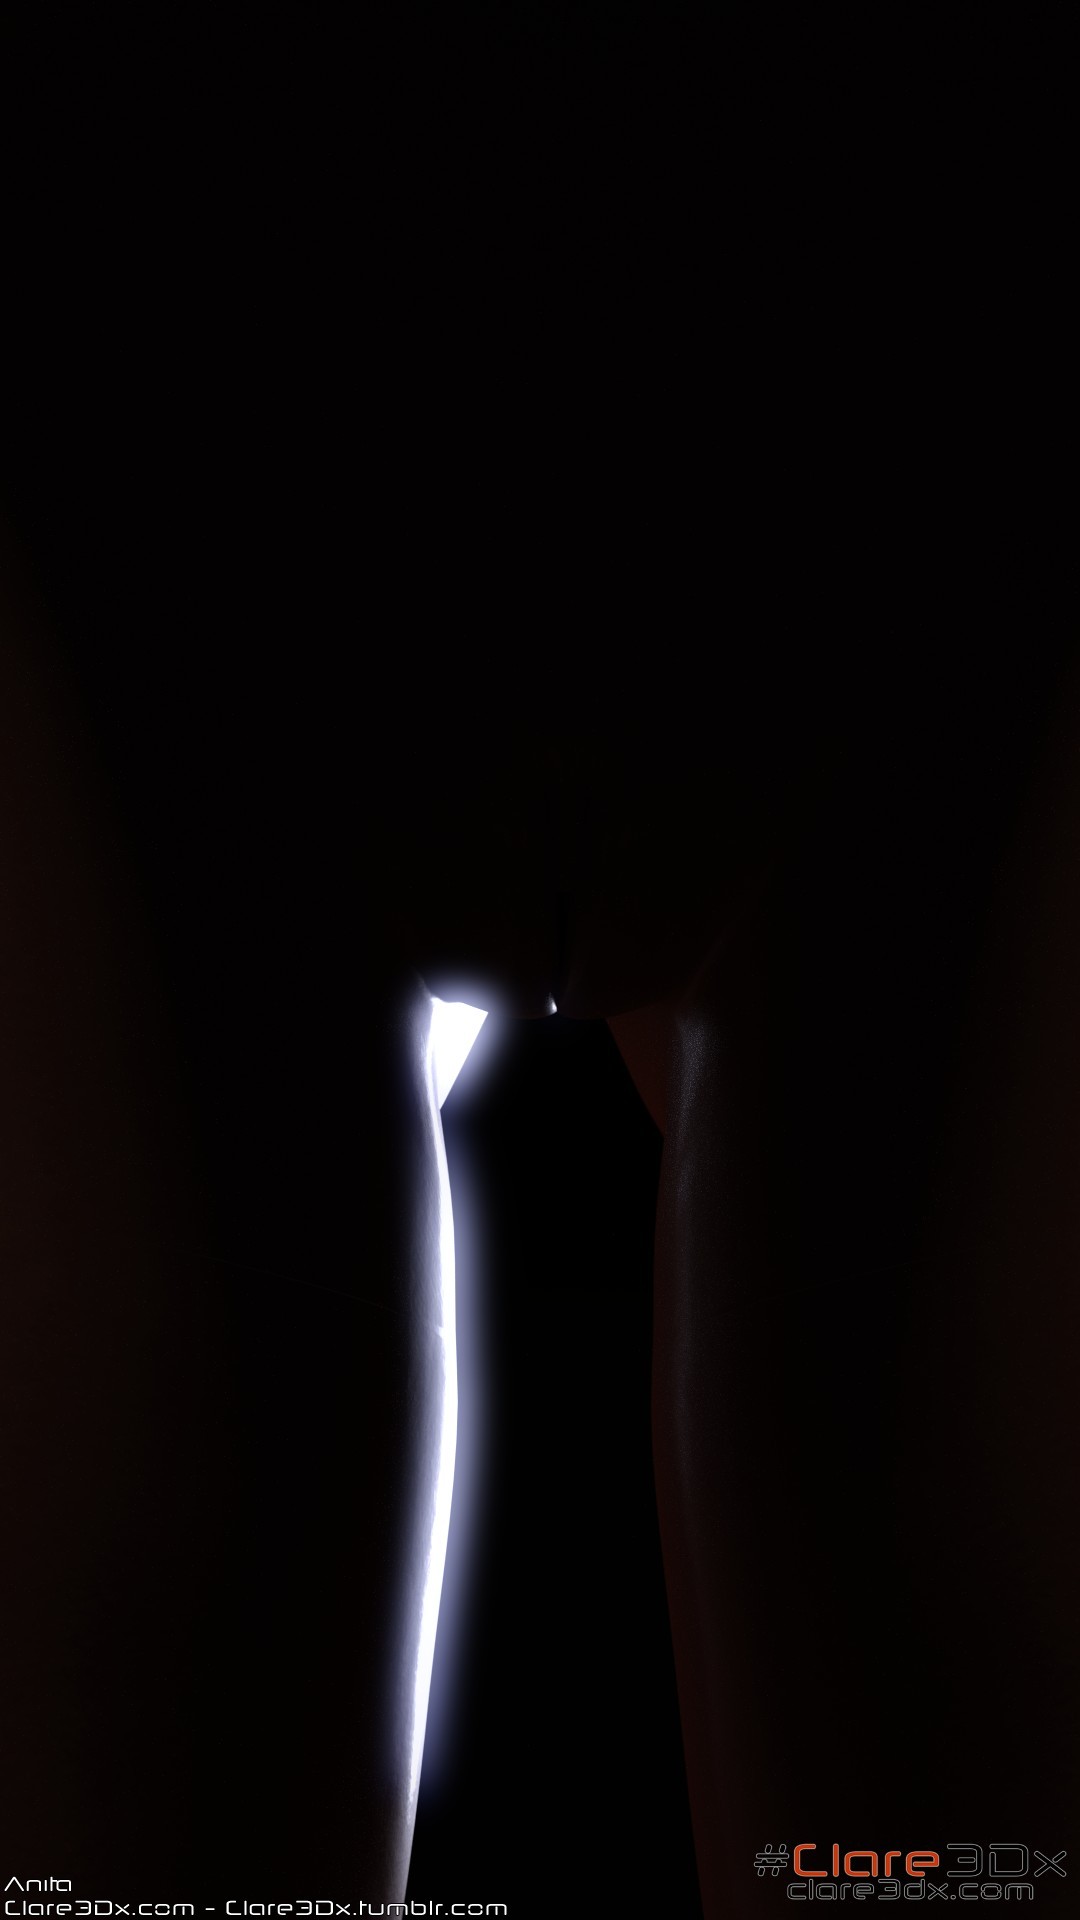 Anita, New Pussy, Dark Nude Art, Silhouette, Close Up  Support me on Patreon, to